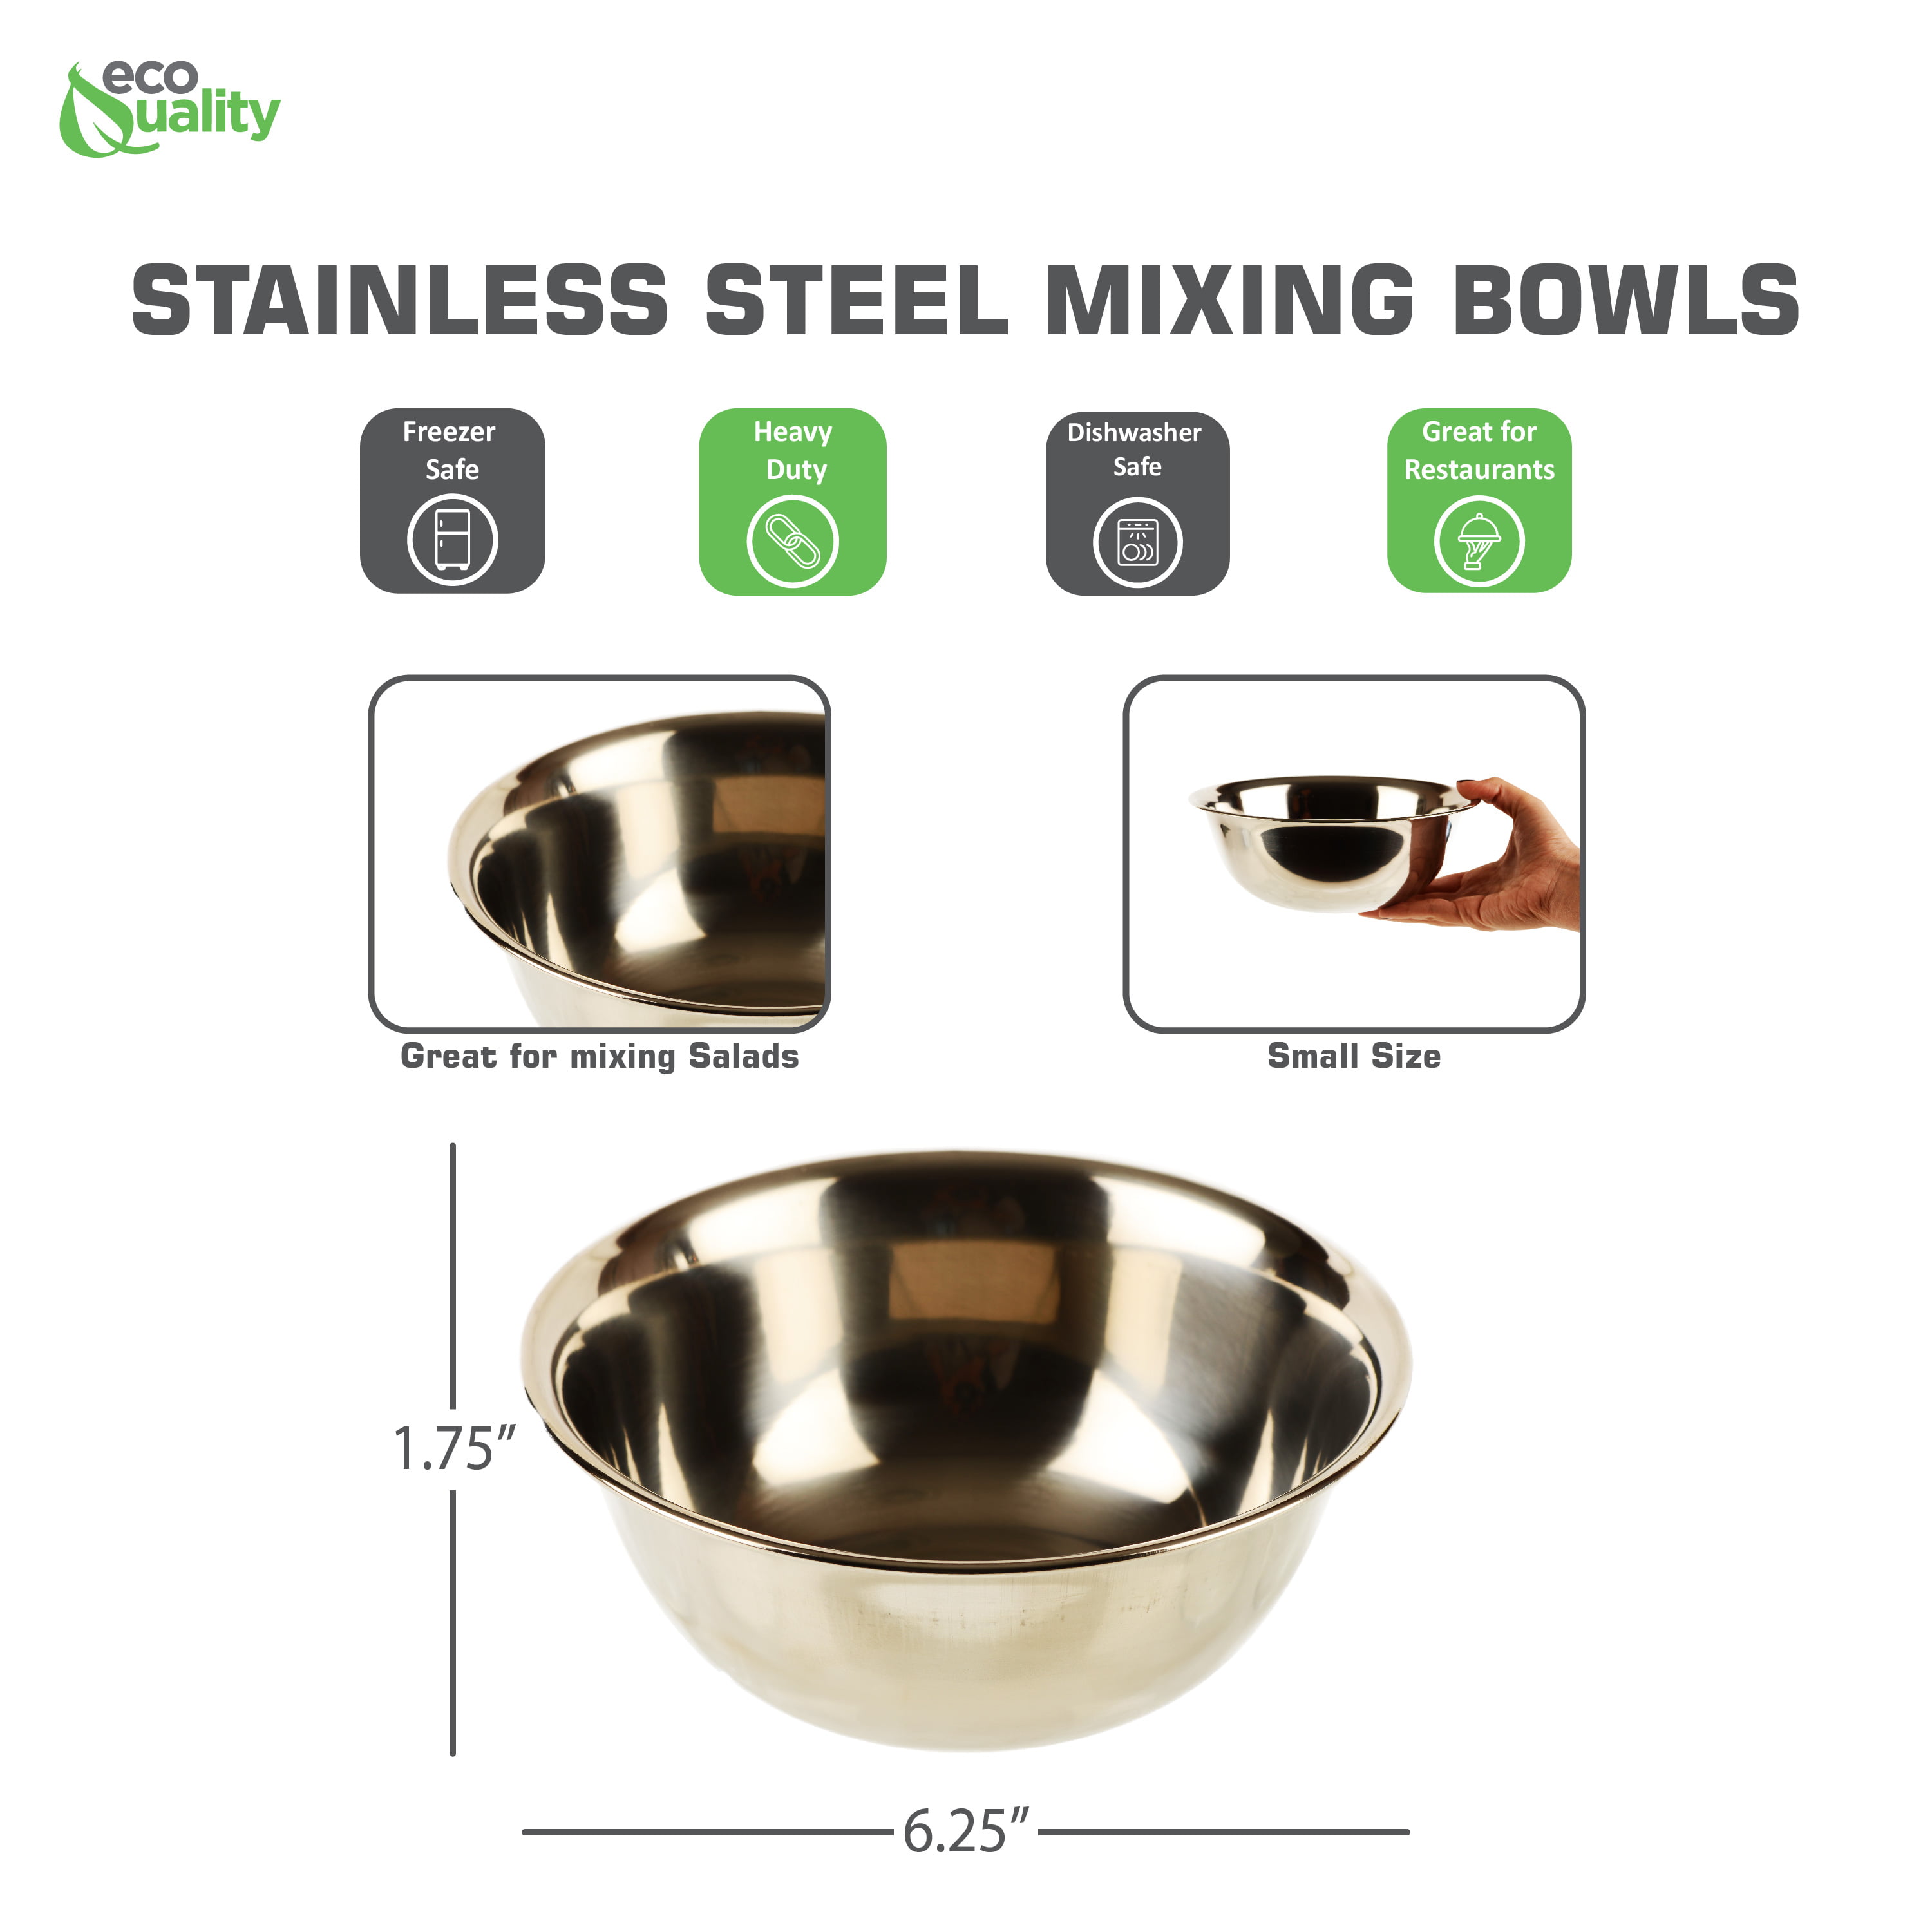 Small Size Mixing Bowls, 0.75 Quart (3/4 qt) Capacity, Small Prep Bowls,  Stainless Steel, Set of 4